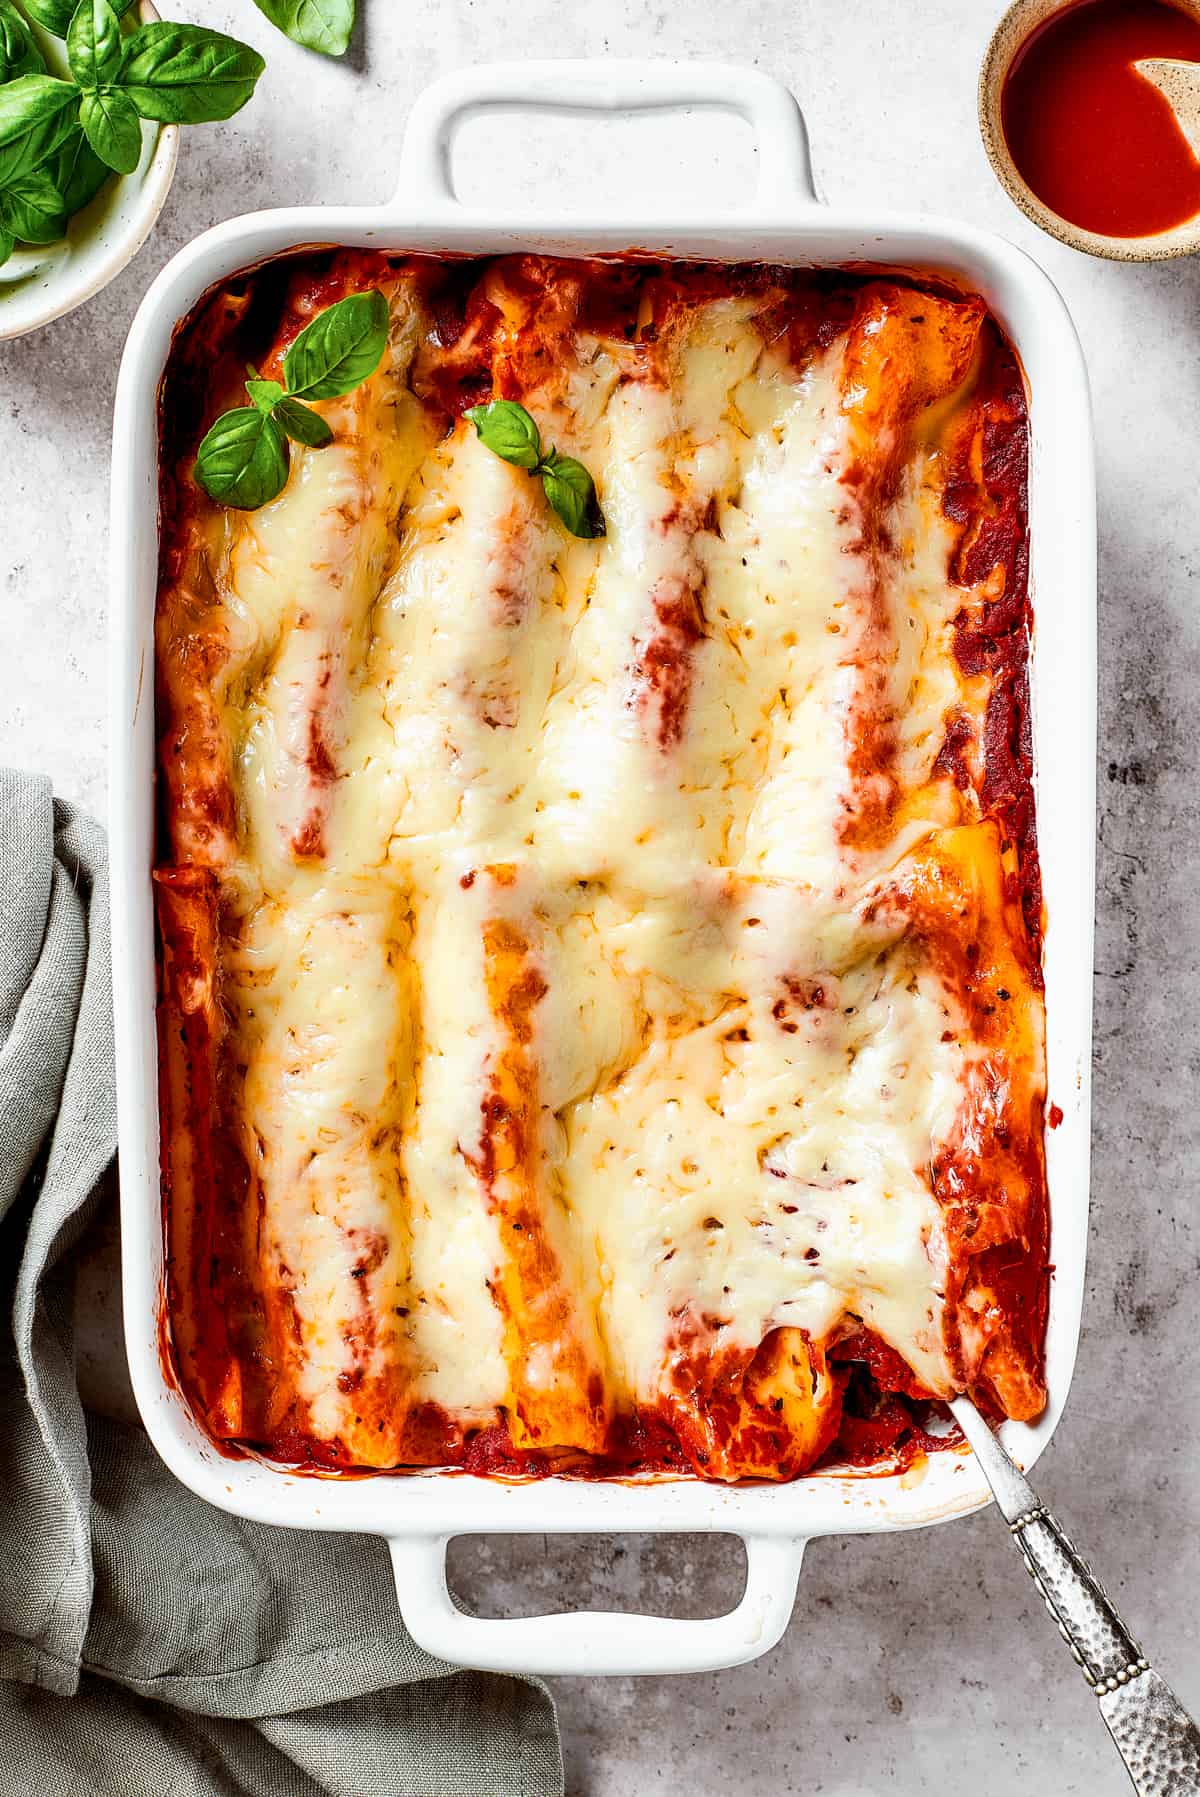 Baked pasta in a dish garnished with fresh basil.